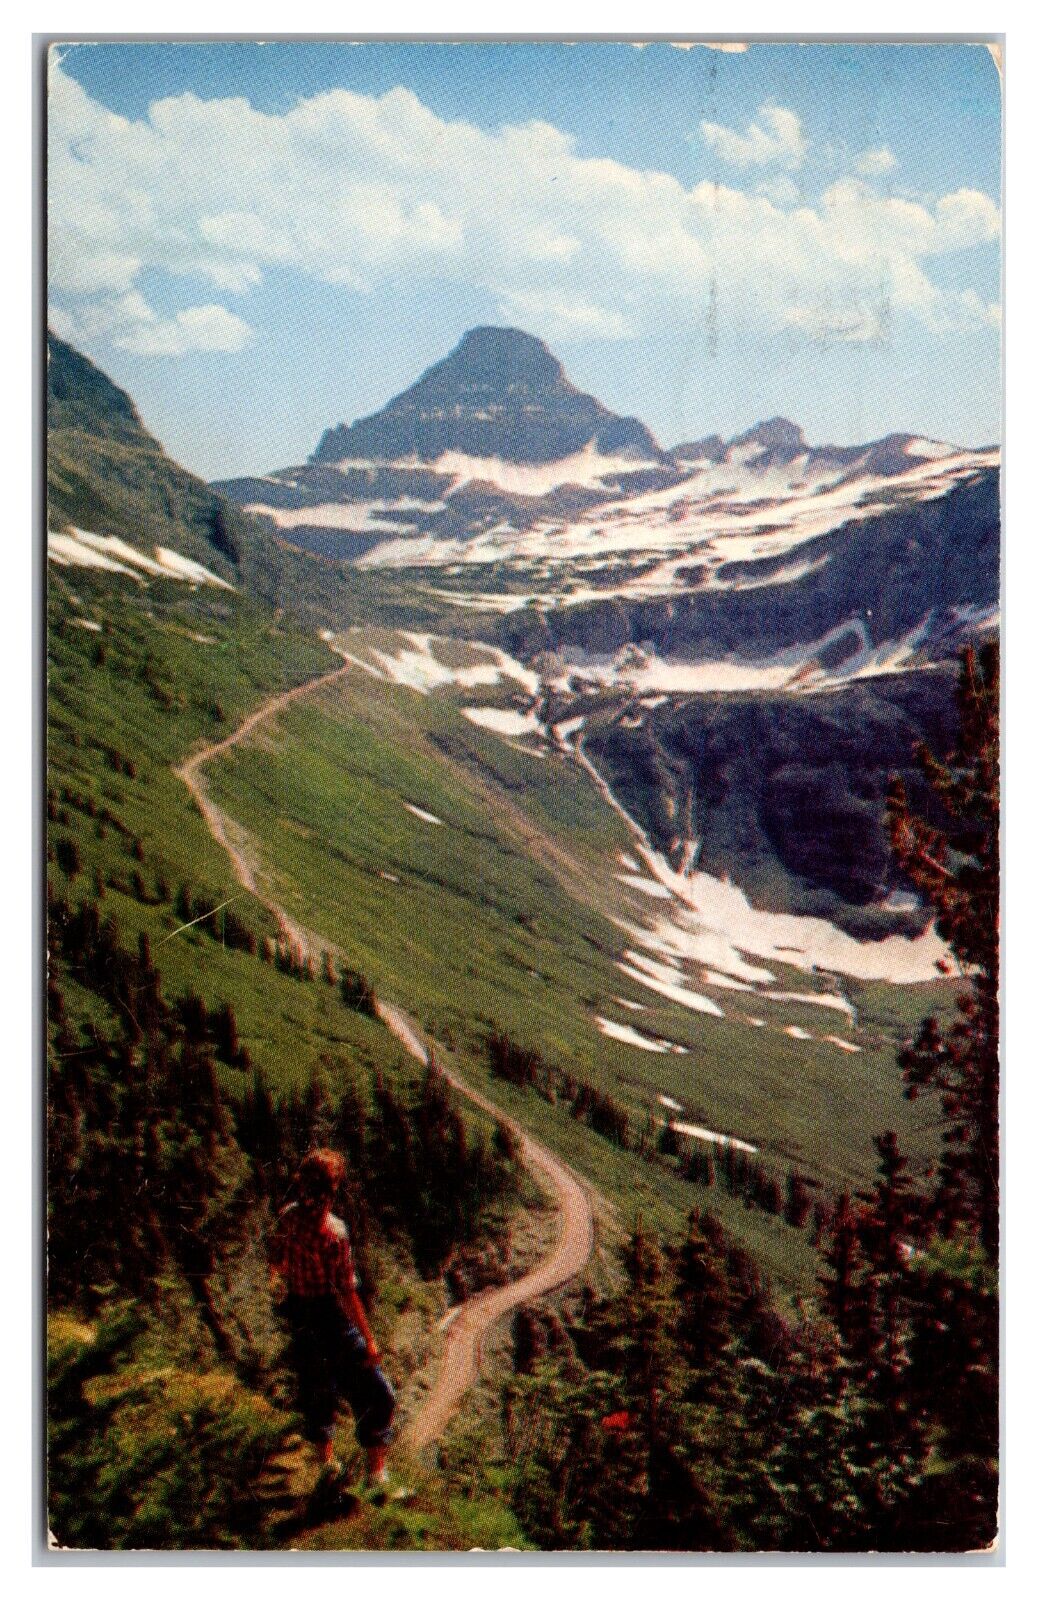 Reynolds Mountain From Going-To-The-Sun-Highway Glacier National Park Postcard